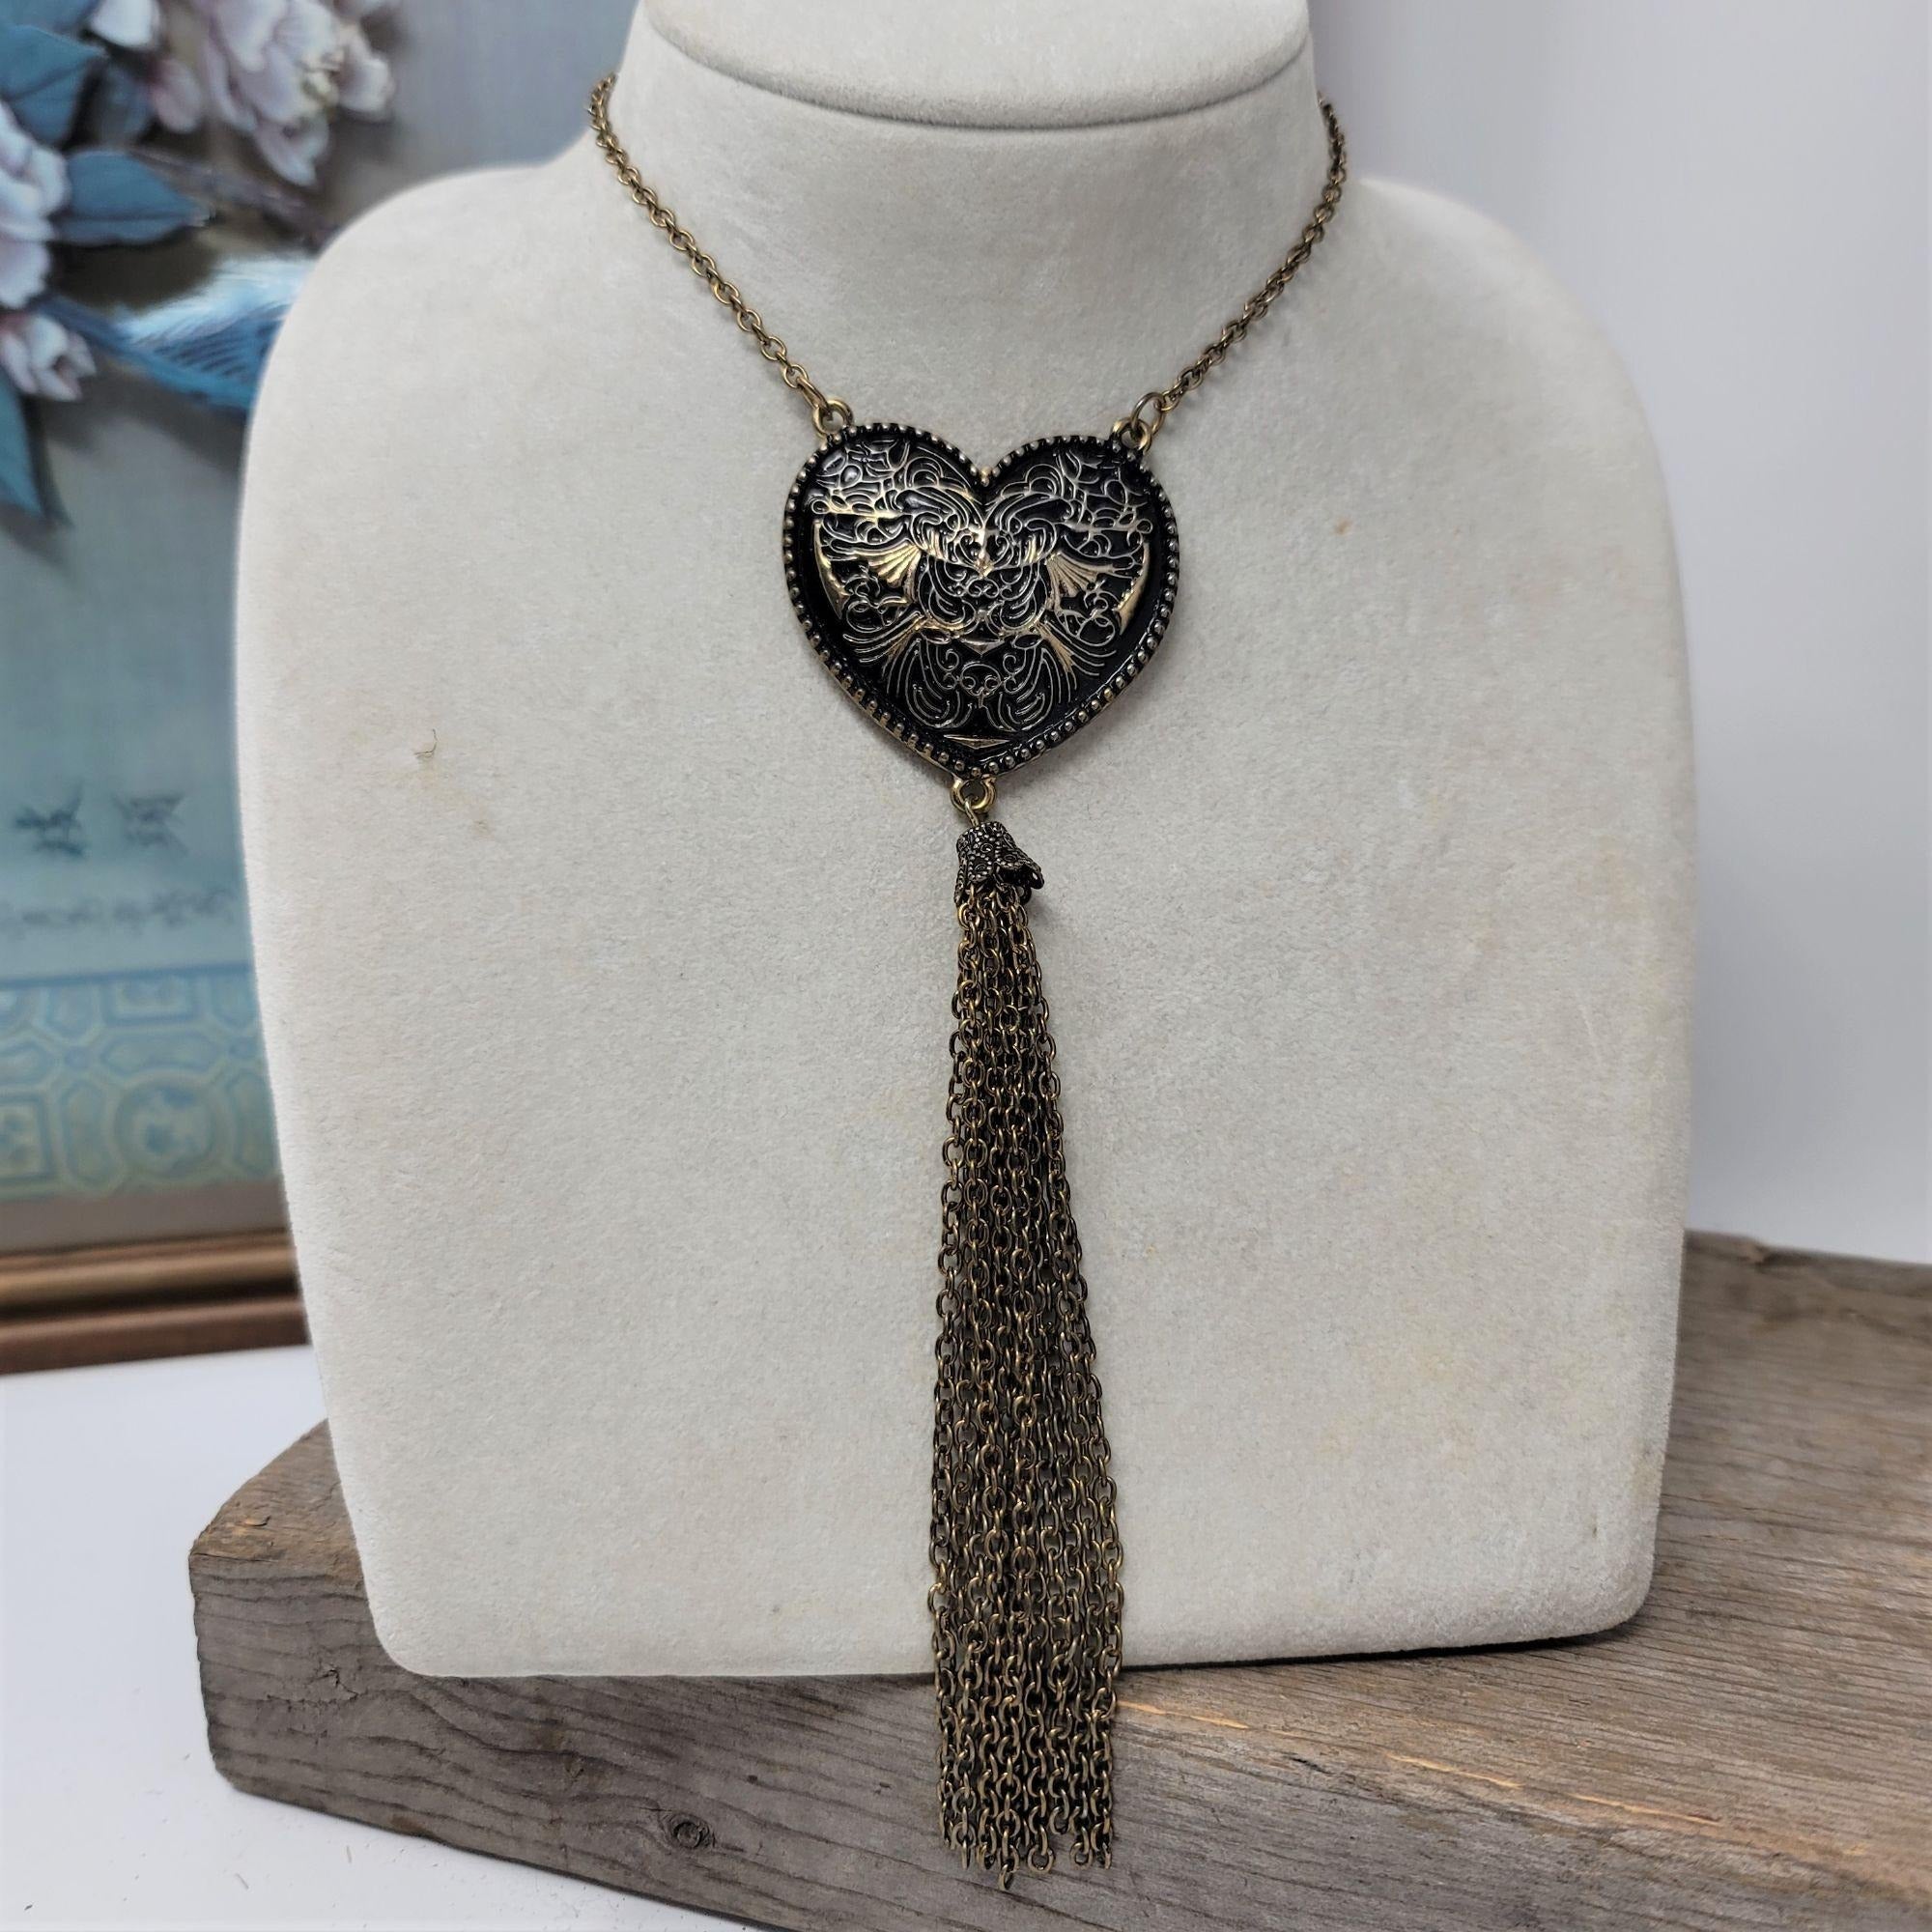 Exotic Heart Necklace Long Chain Tassel